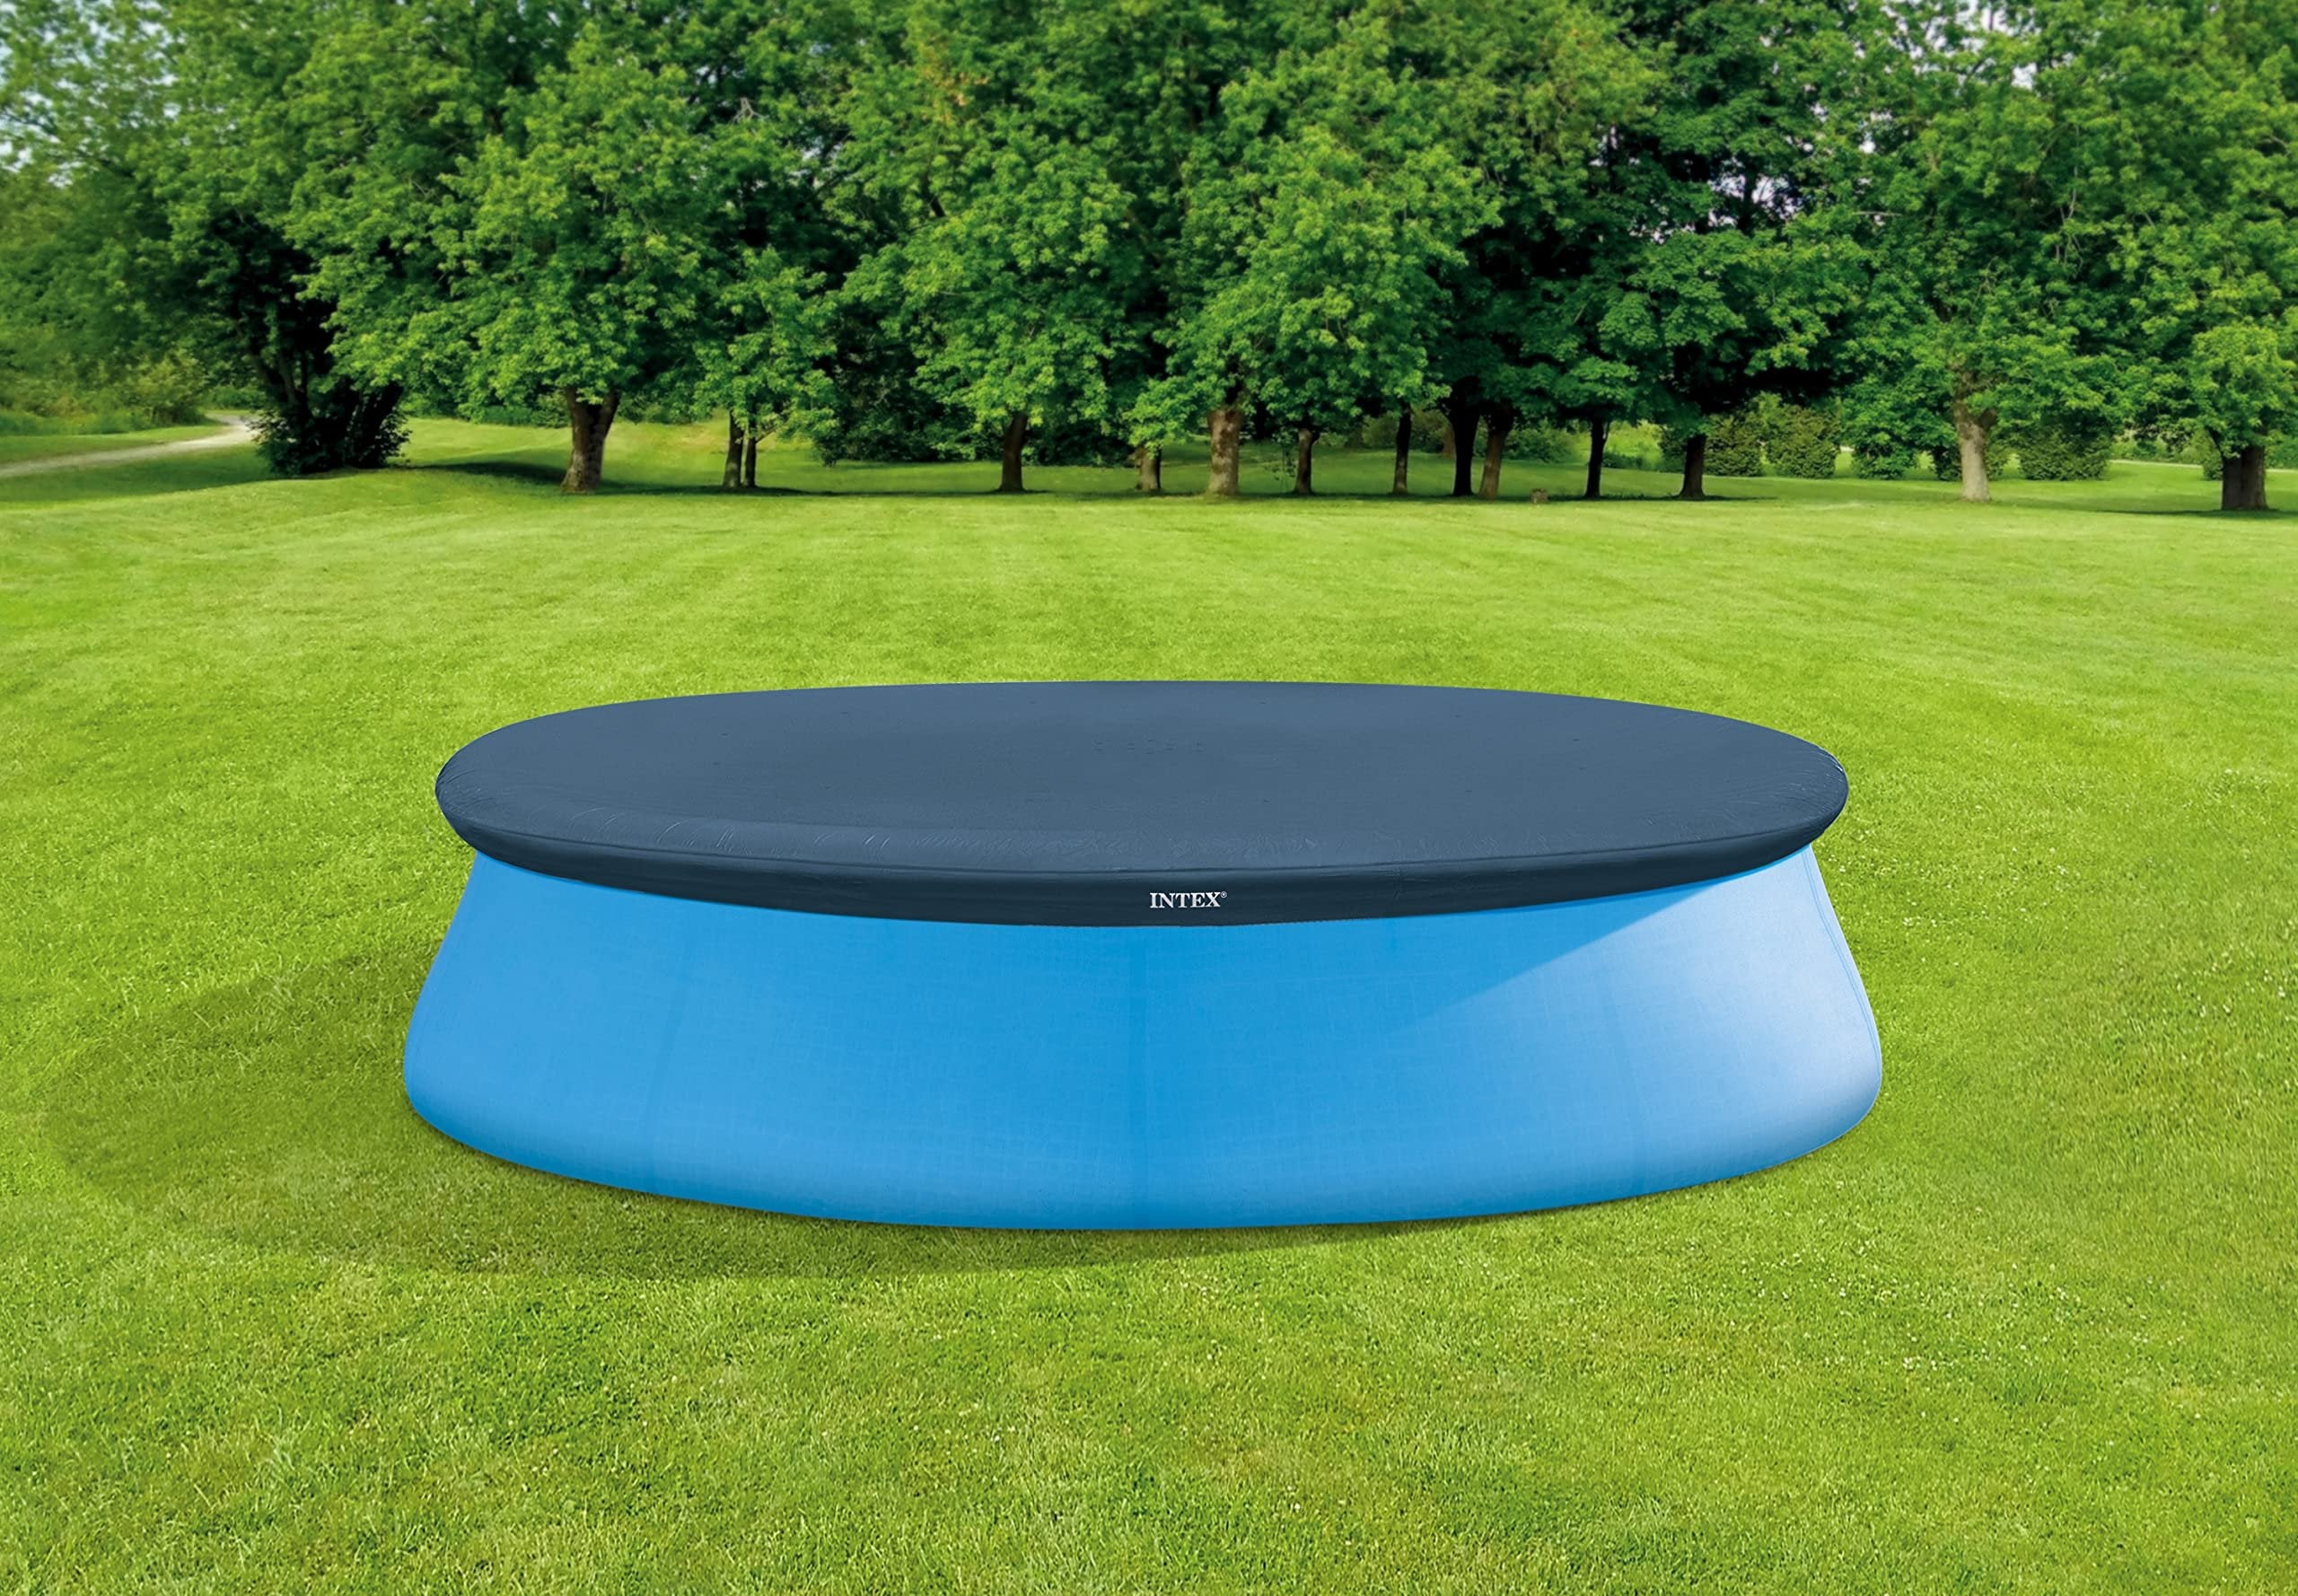 INTEX 28021E Pool Cover: For 10ft Round Easy Set Pools - Includes Rope Tie - Drain Holes - 12in Overhang - Snug Fit